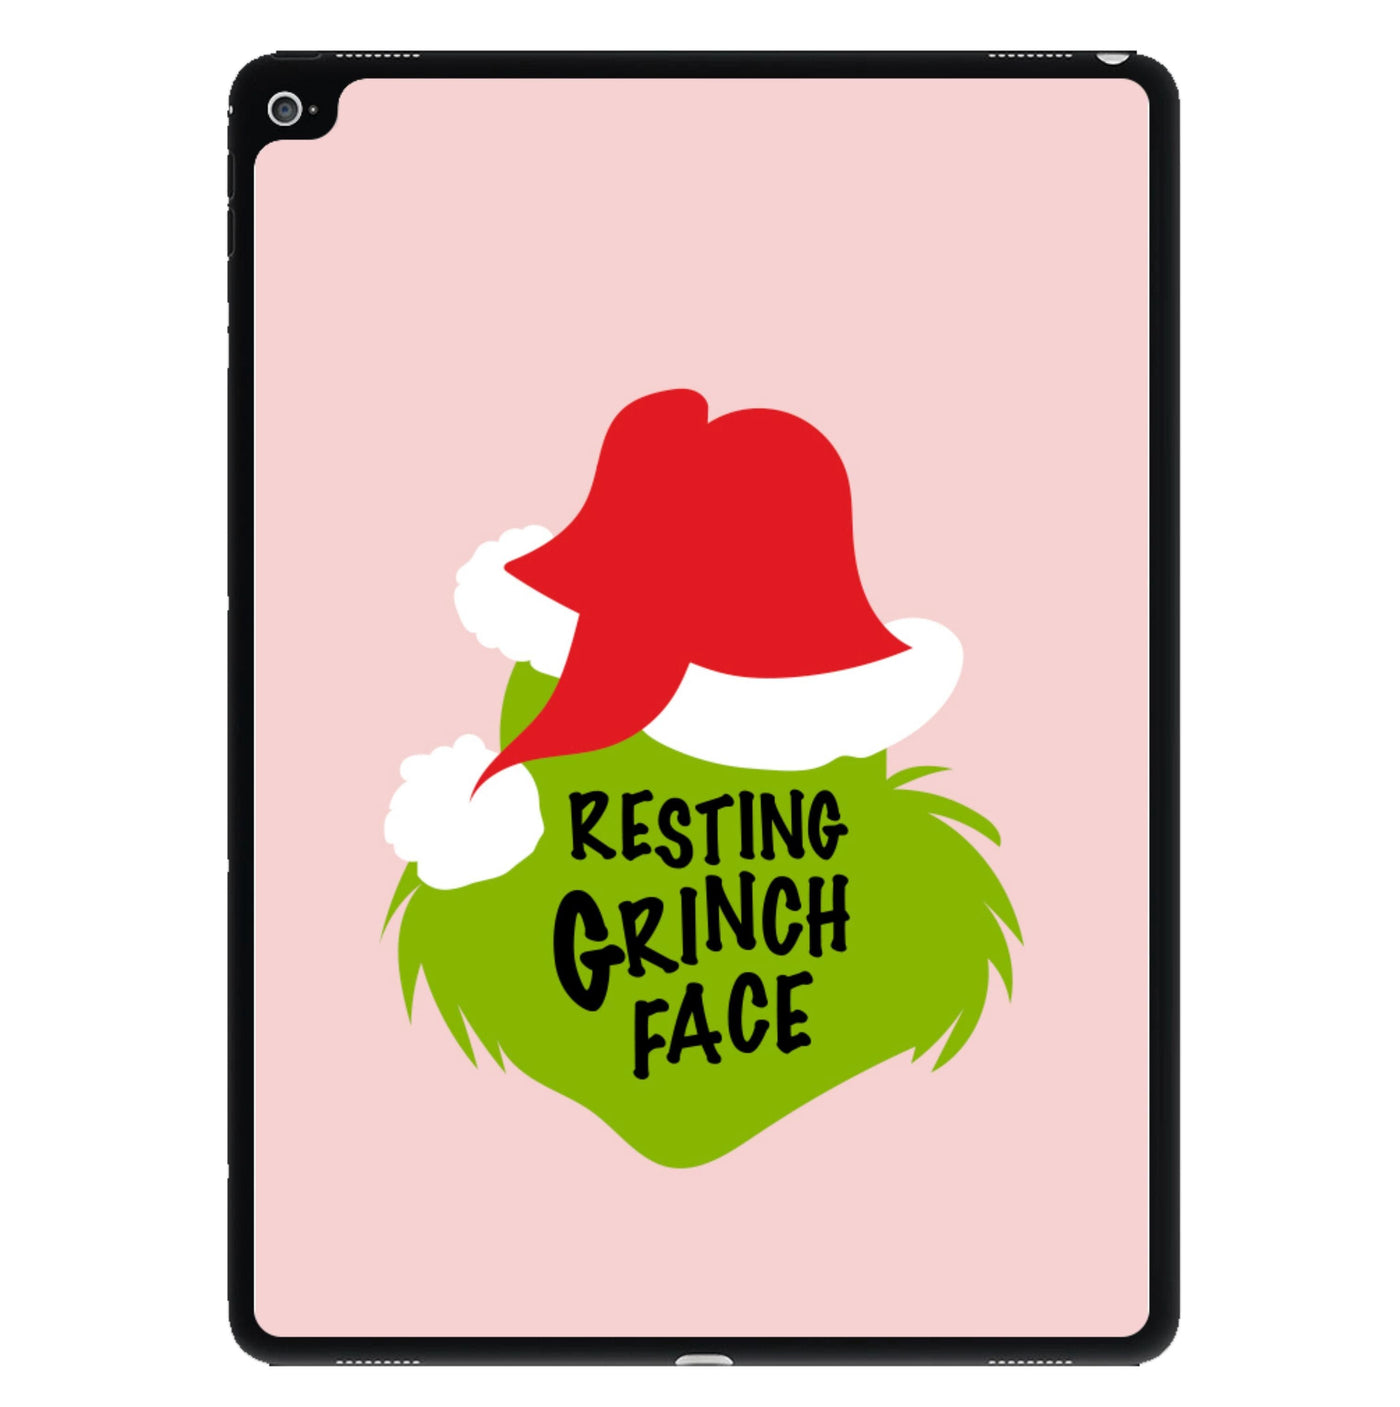 Resting Grinch Face iPad Case